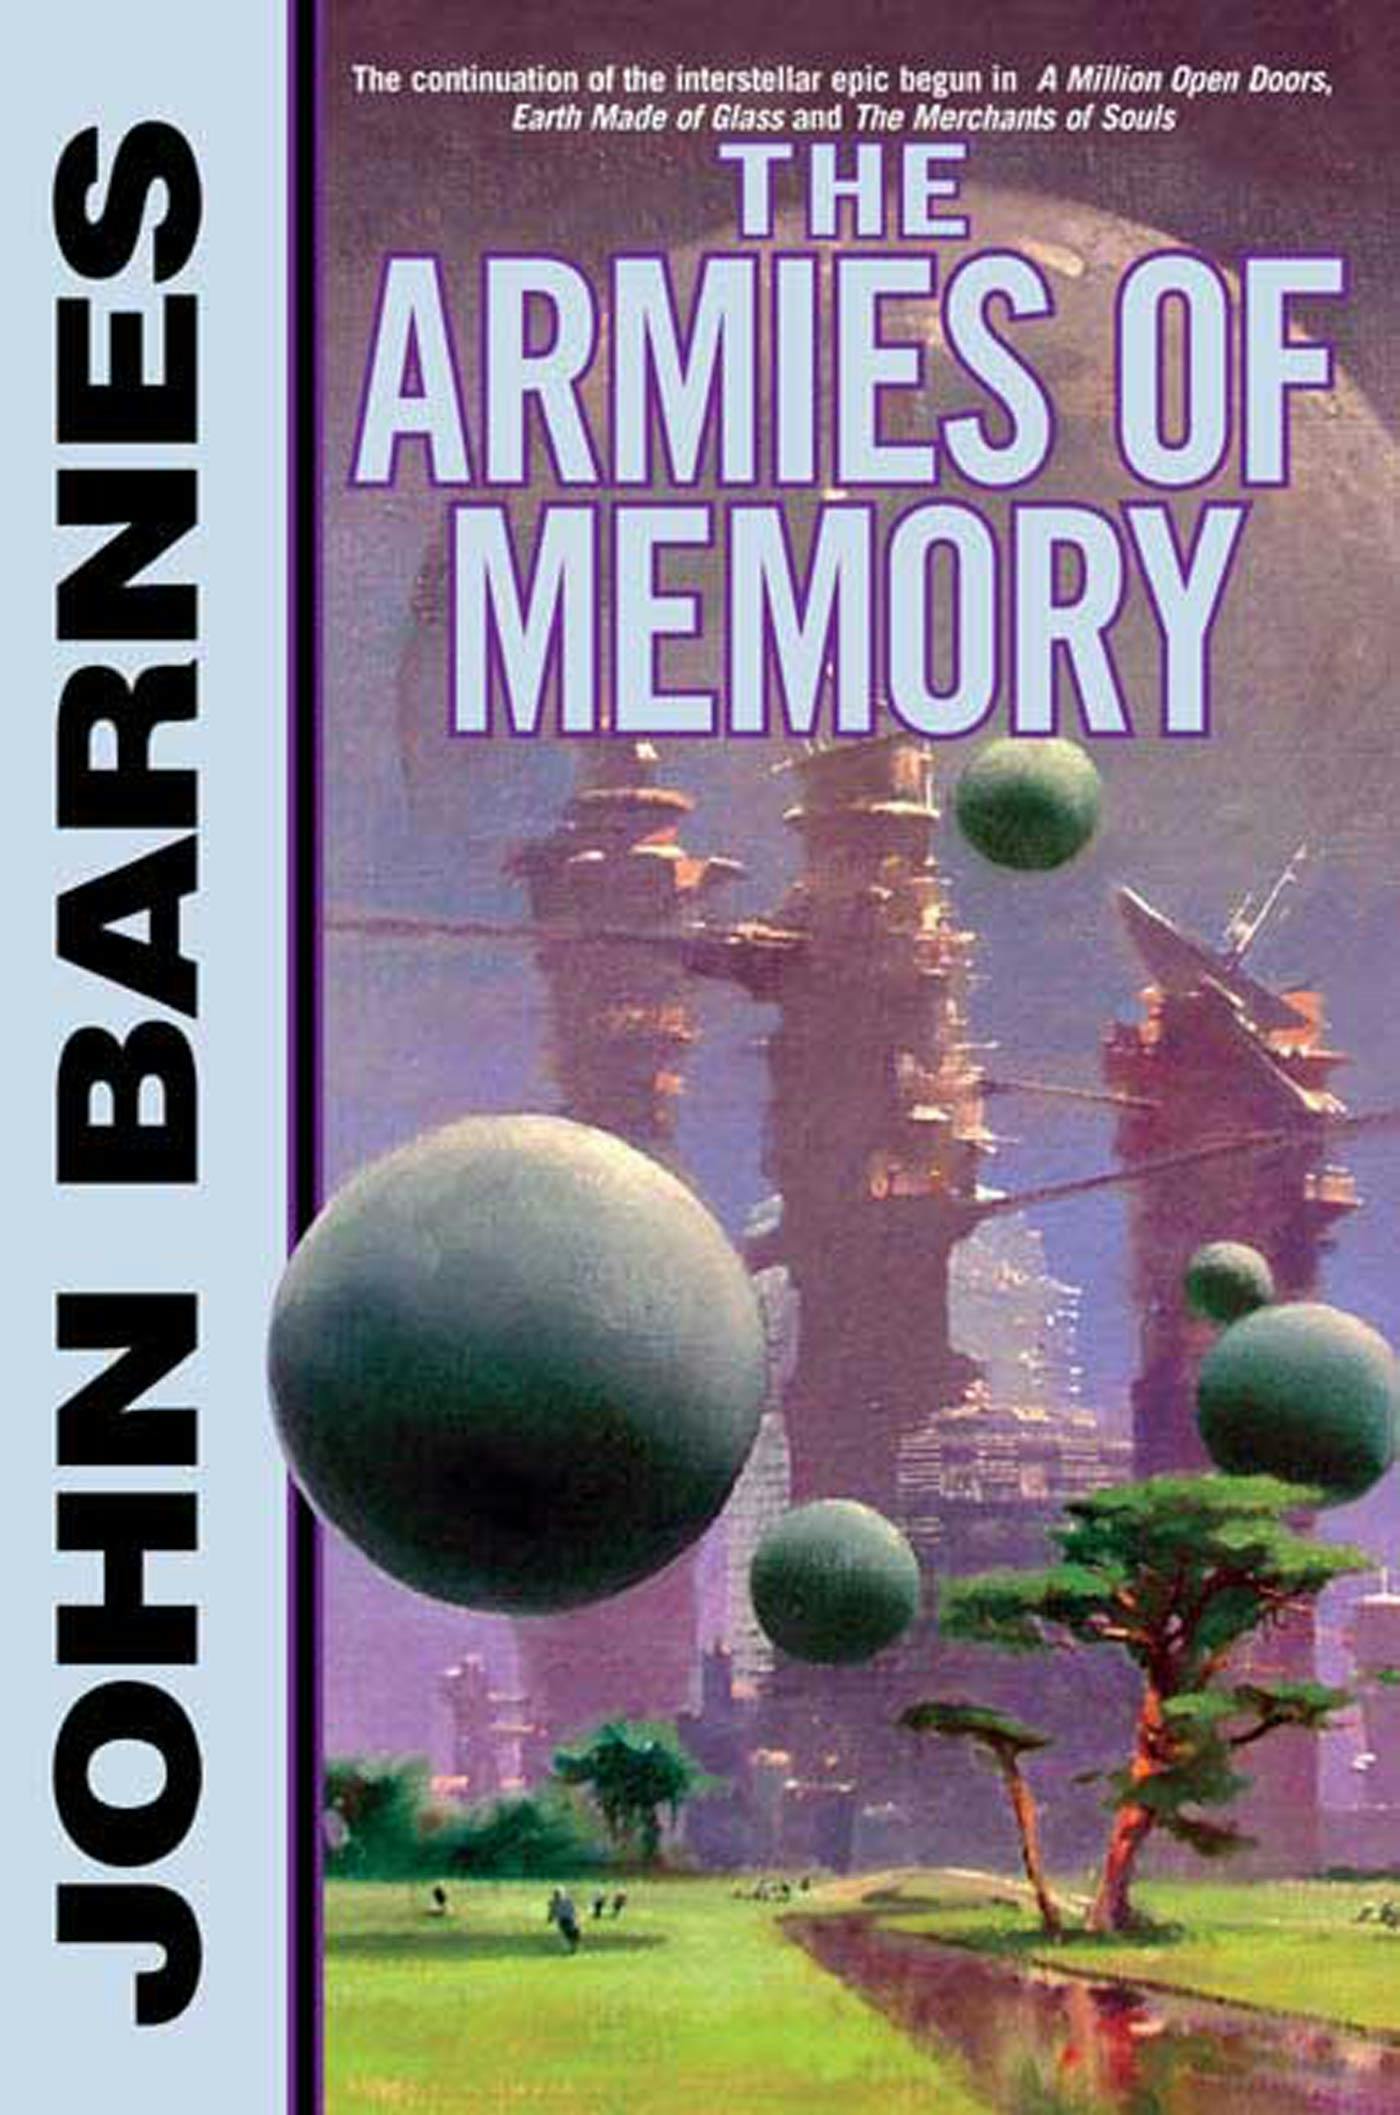 Cover for the book titled as: The Armies of Memory